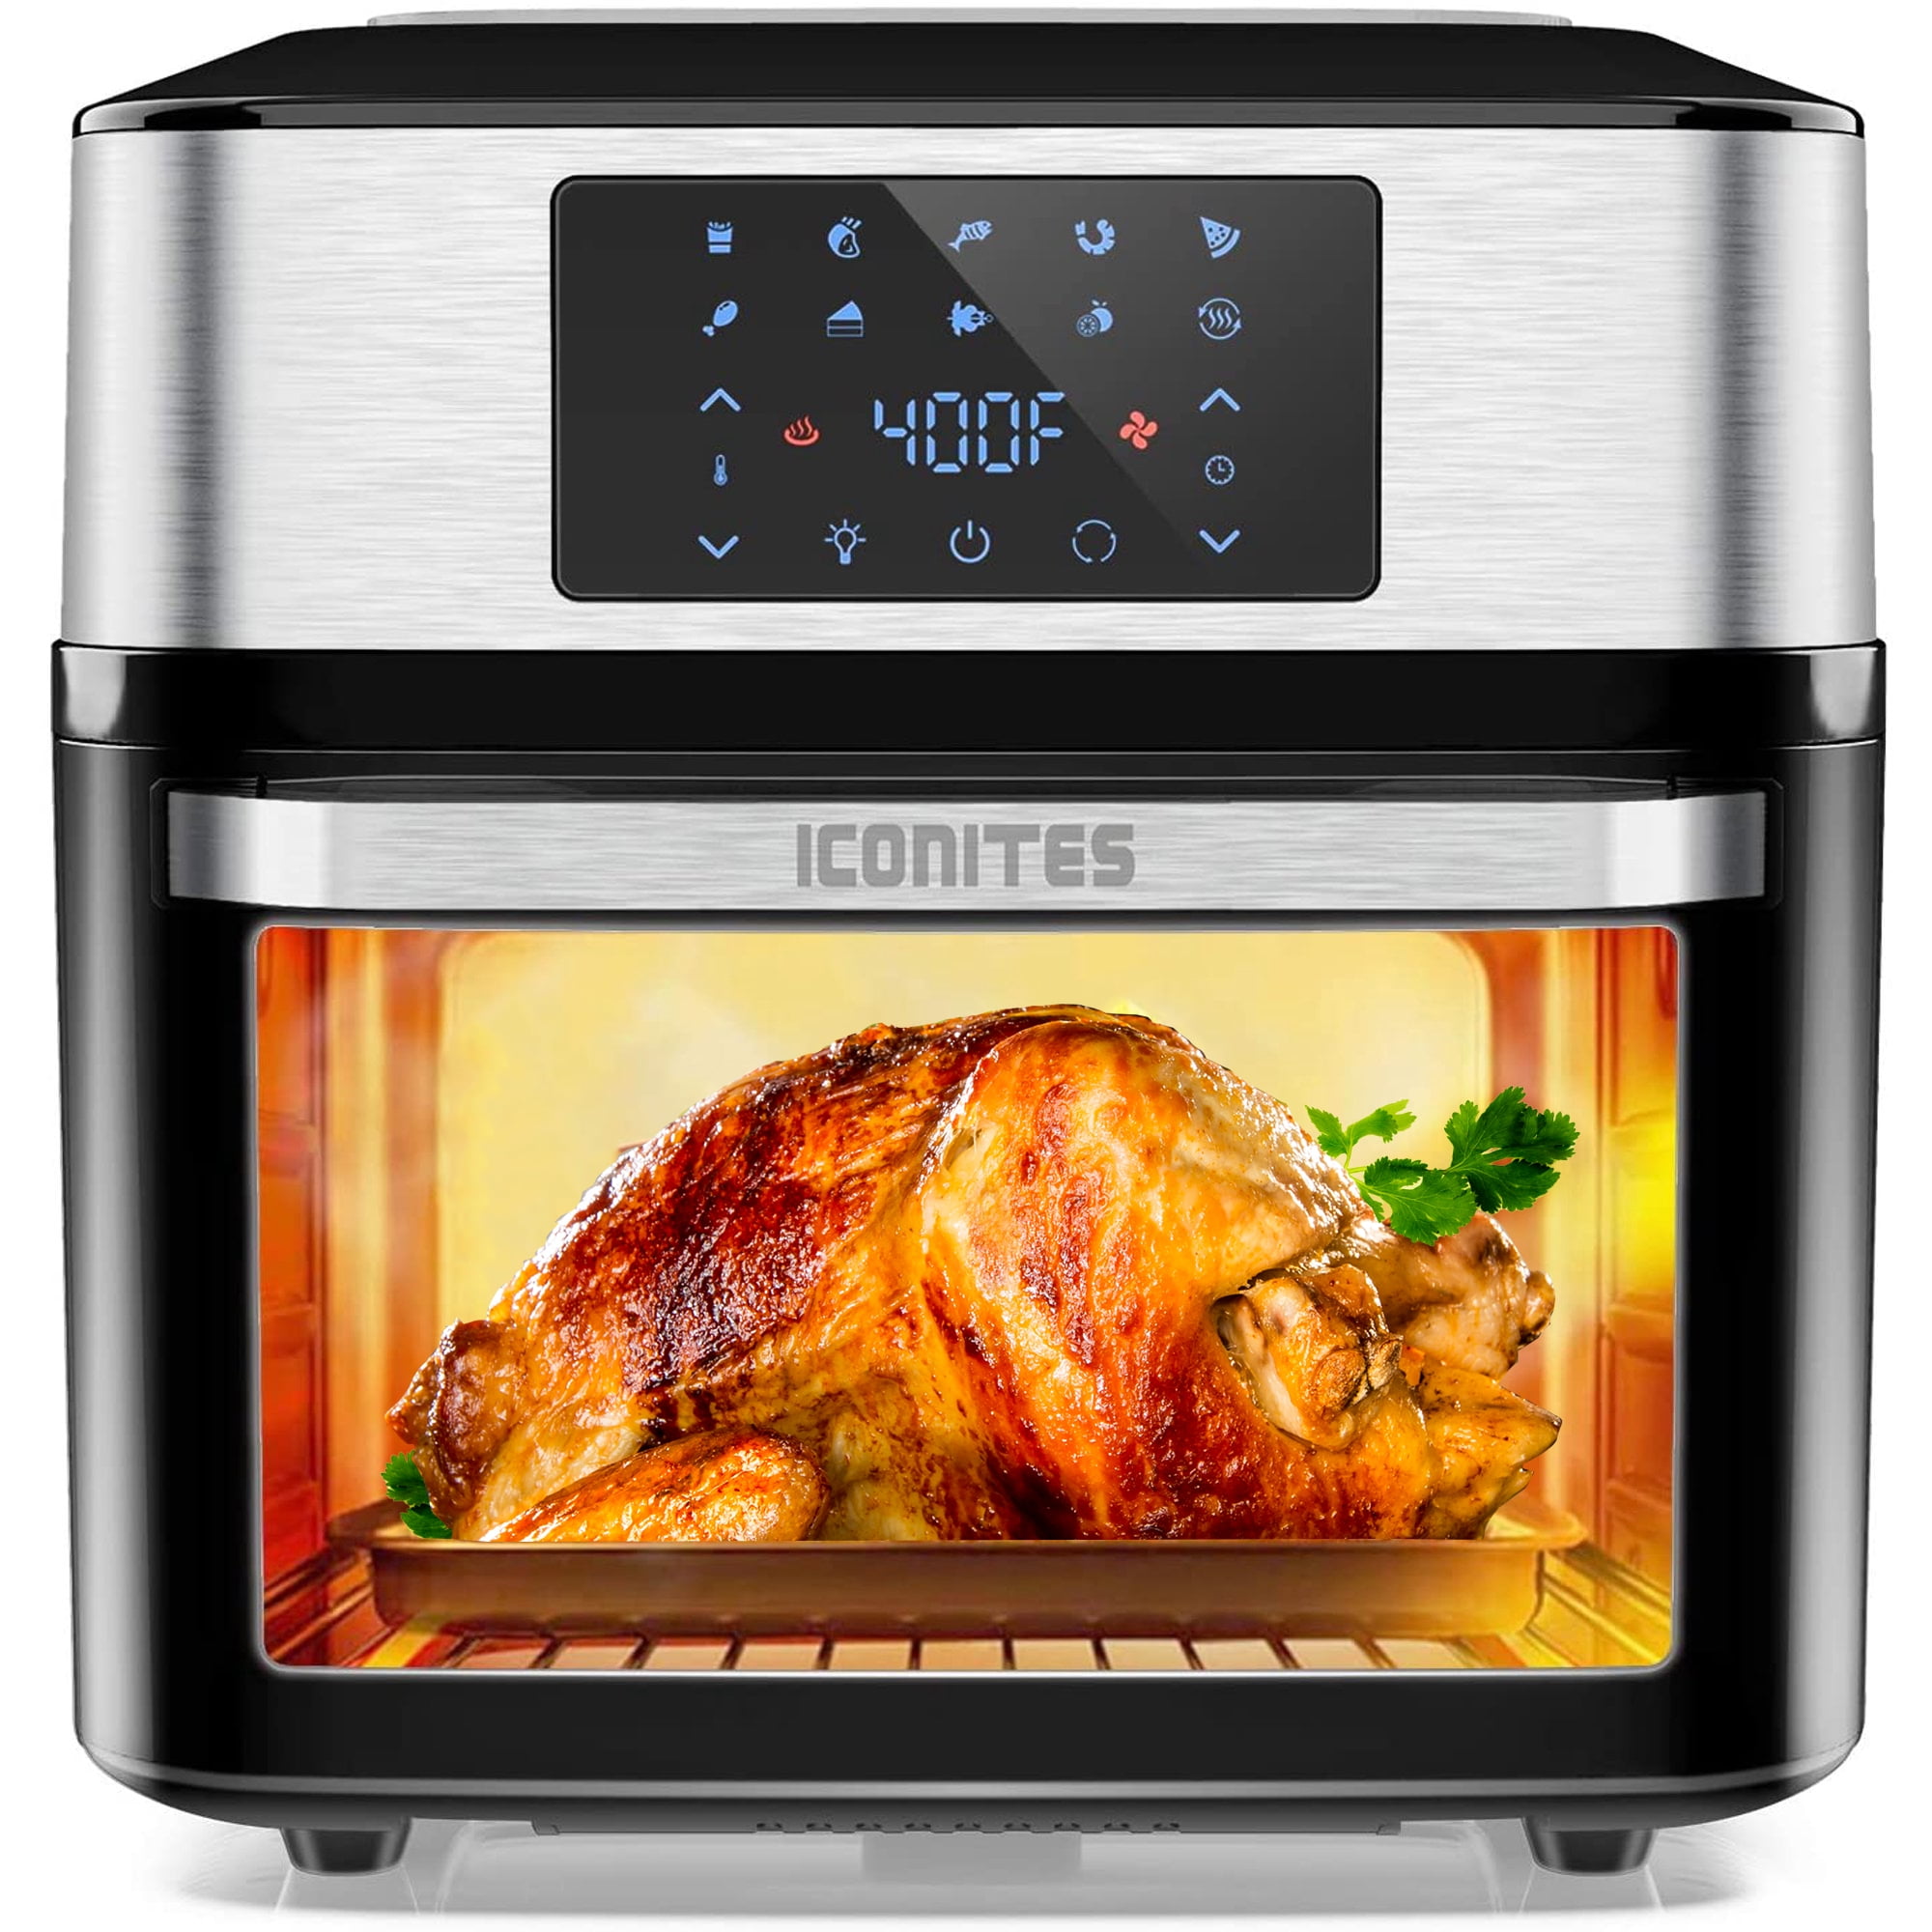 Iconites 10-in-1 Air Fryer Oven Unboxing and Recipe Ideas